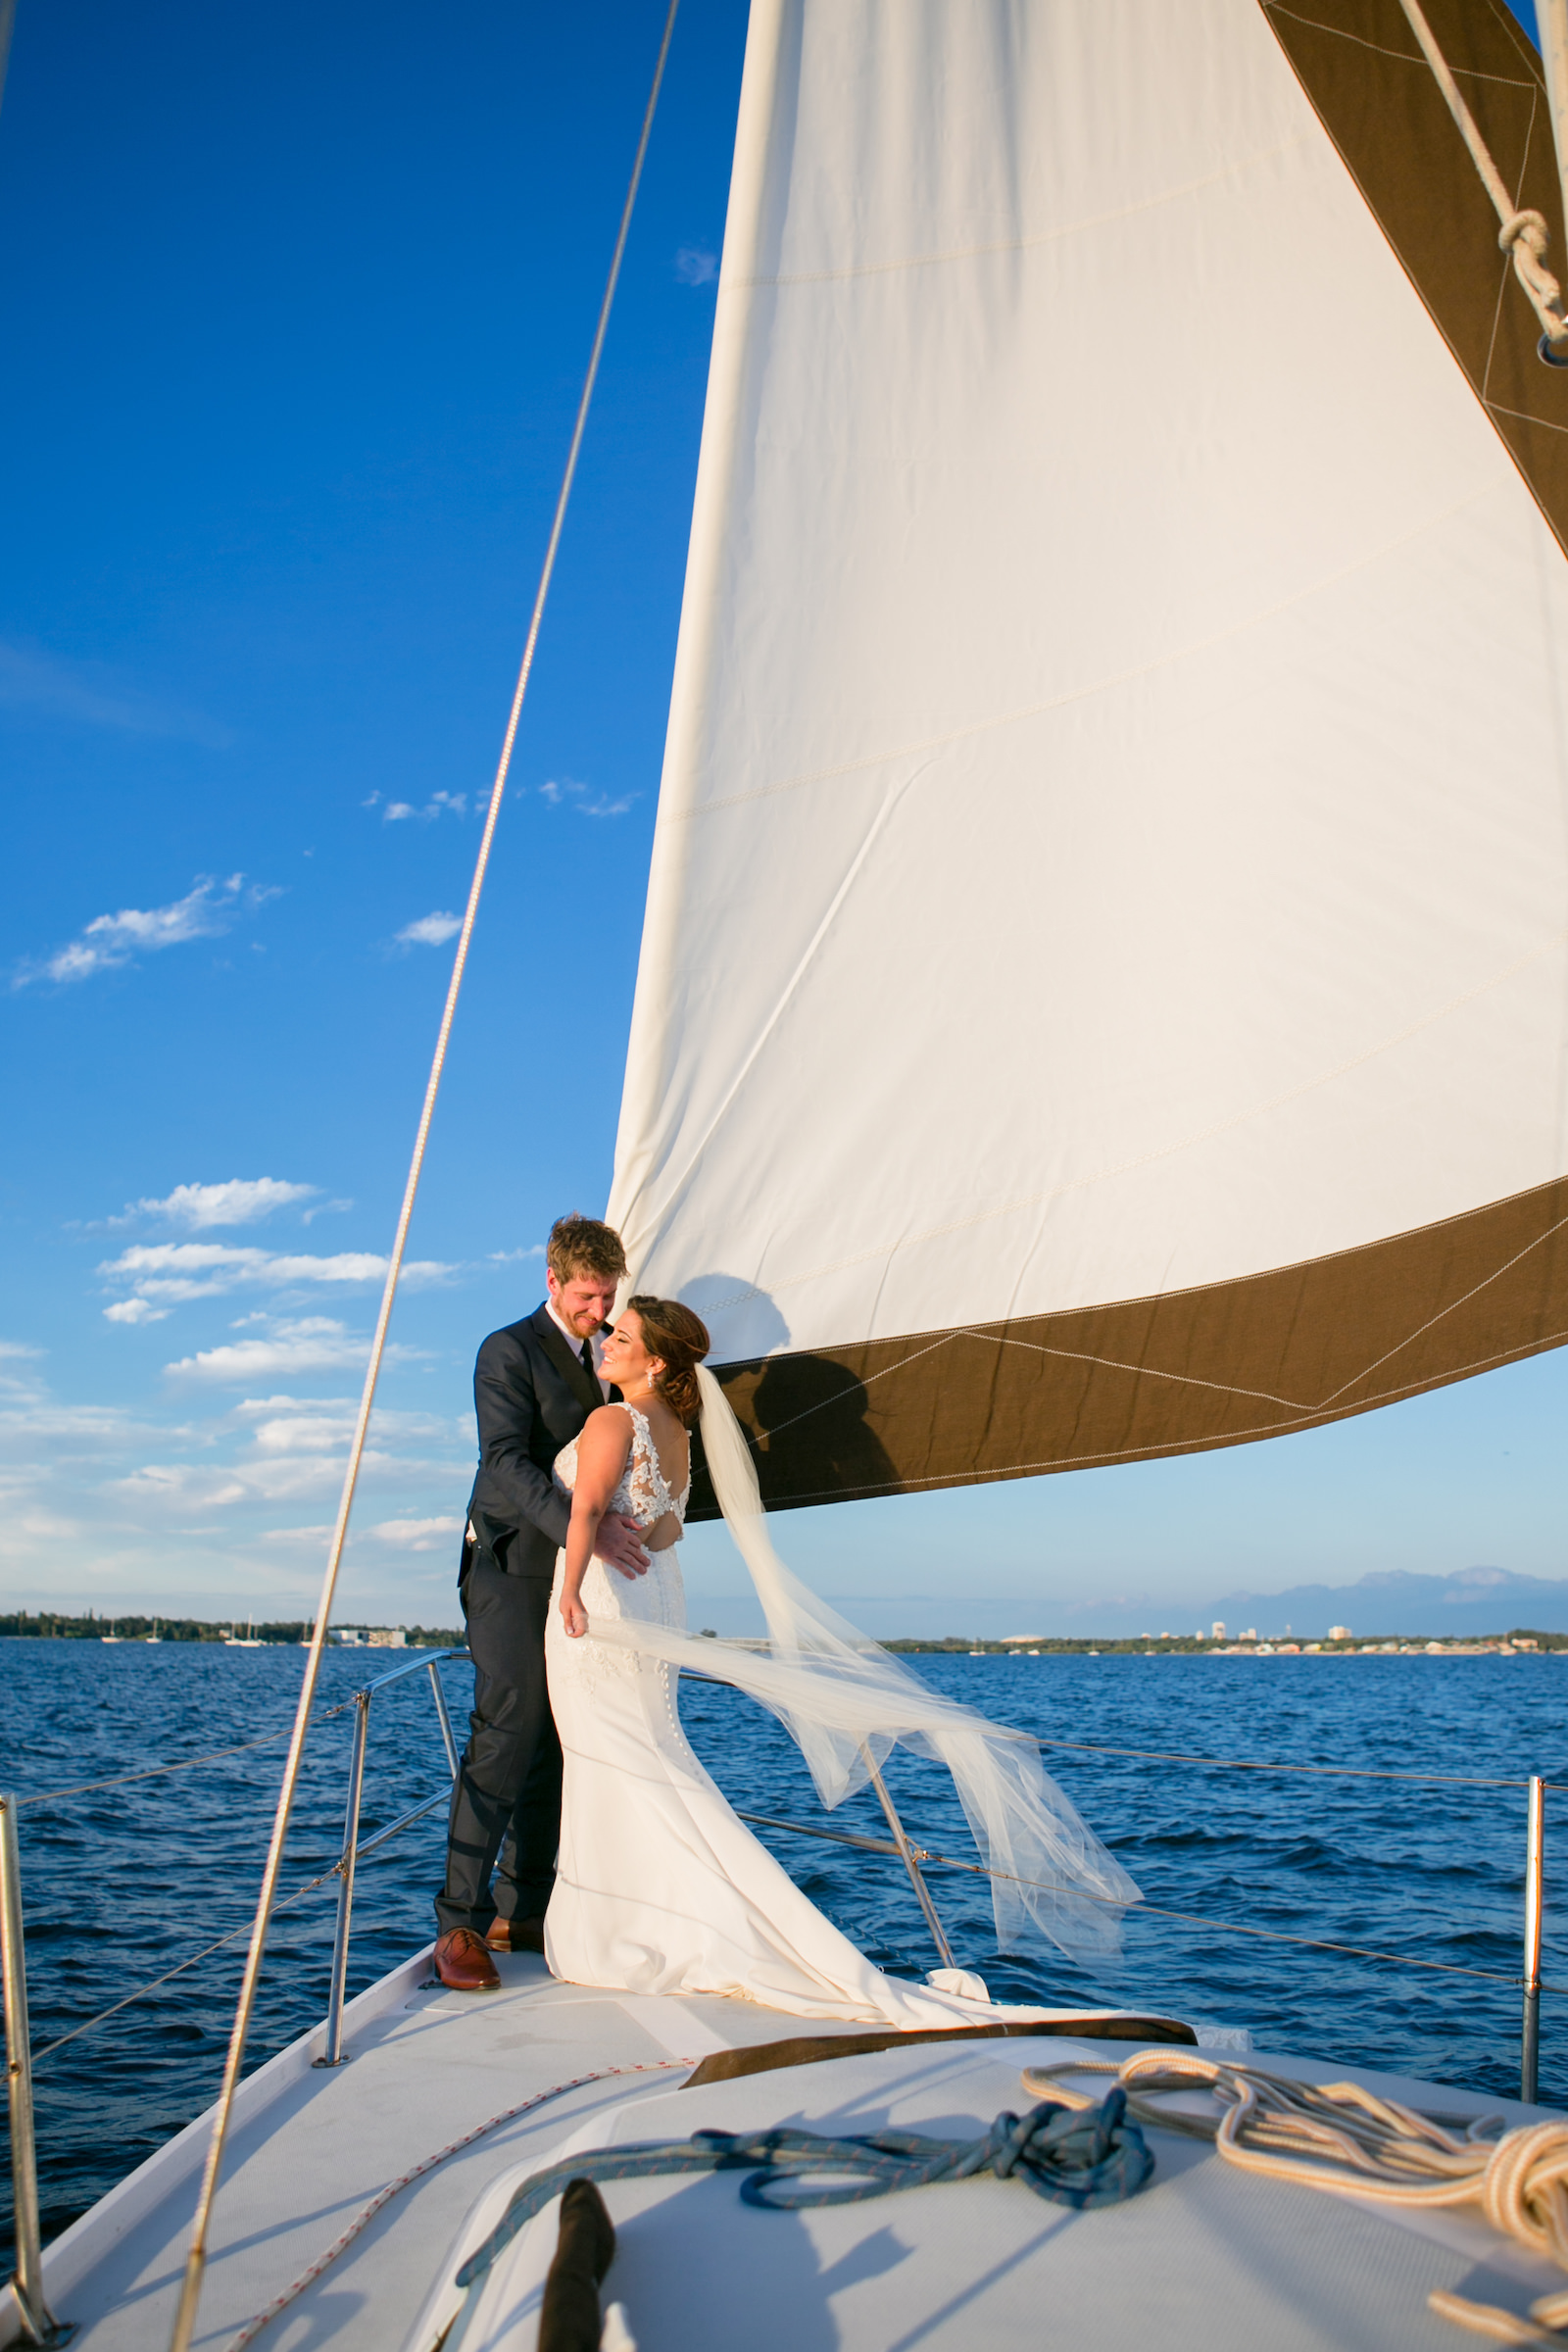 Florida Bride and Groom Sitting on Sail Boat Wedding Portrait | Tampa Bay Wedding Photographer Carrie Wildes Photography